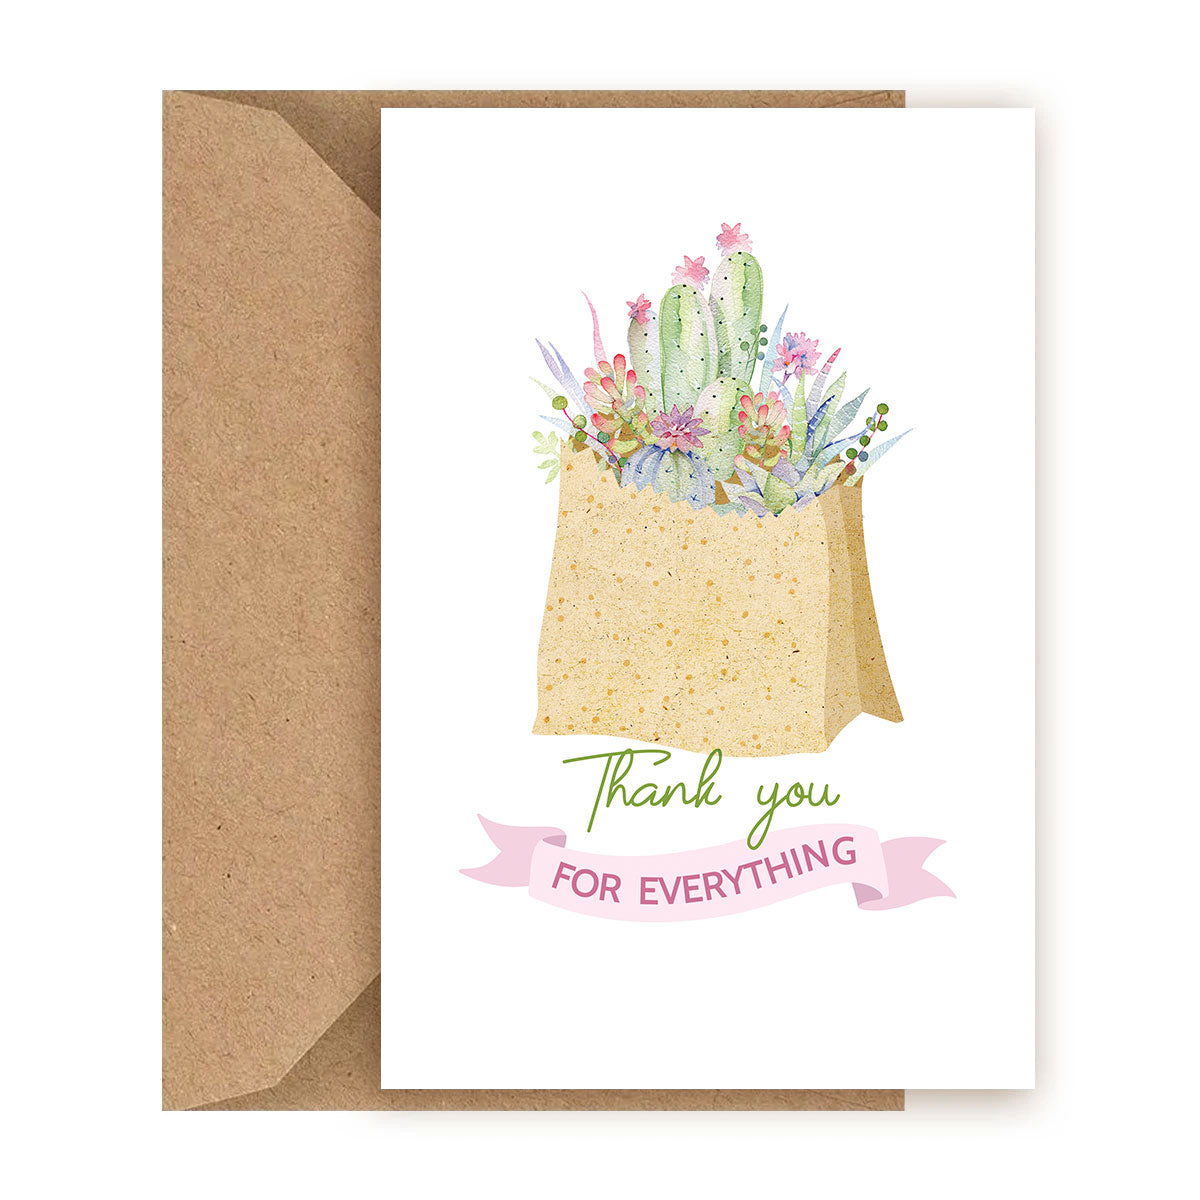 Thank You for Everything Card for sale, Succulent Happy Birthday Card for sale, Cactus Greeting Card, Succulents Greeting Card, Succulents Gift Ideas